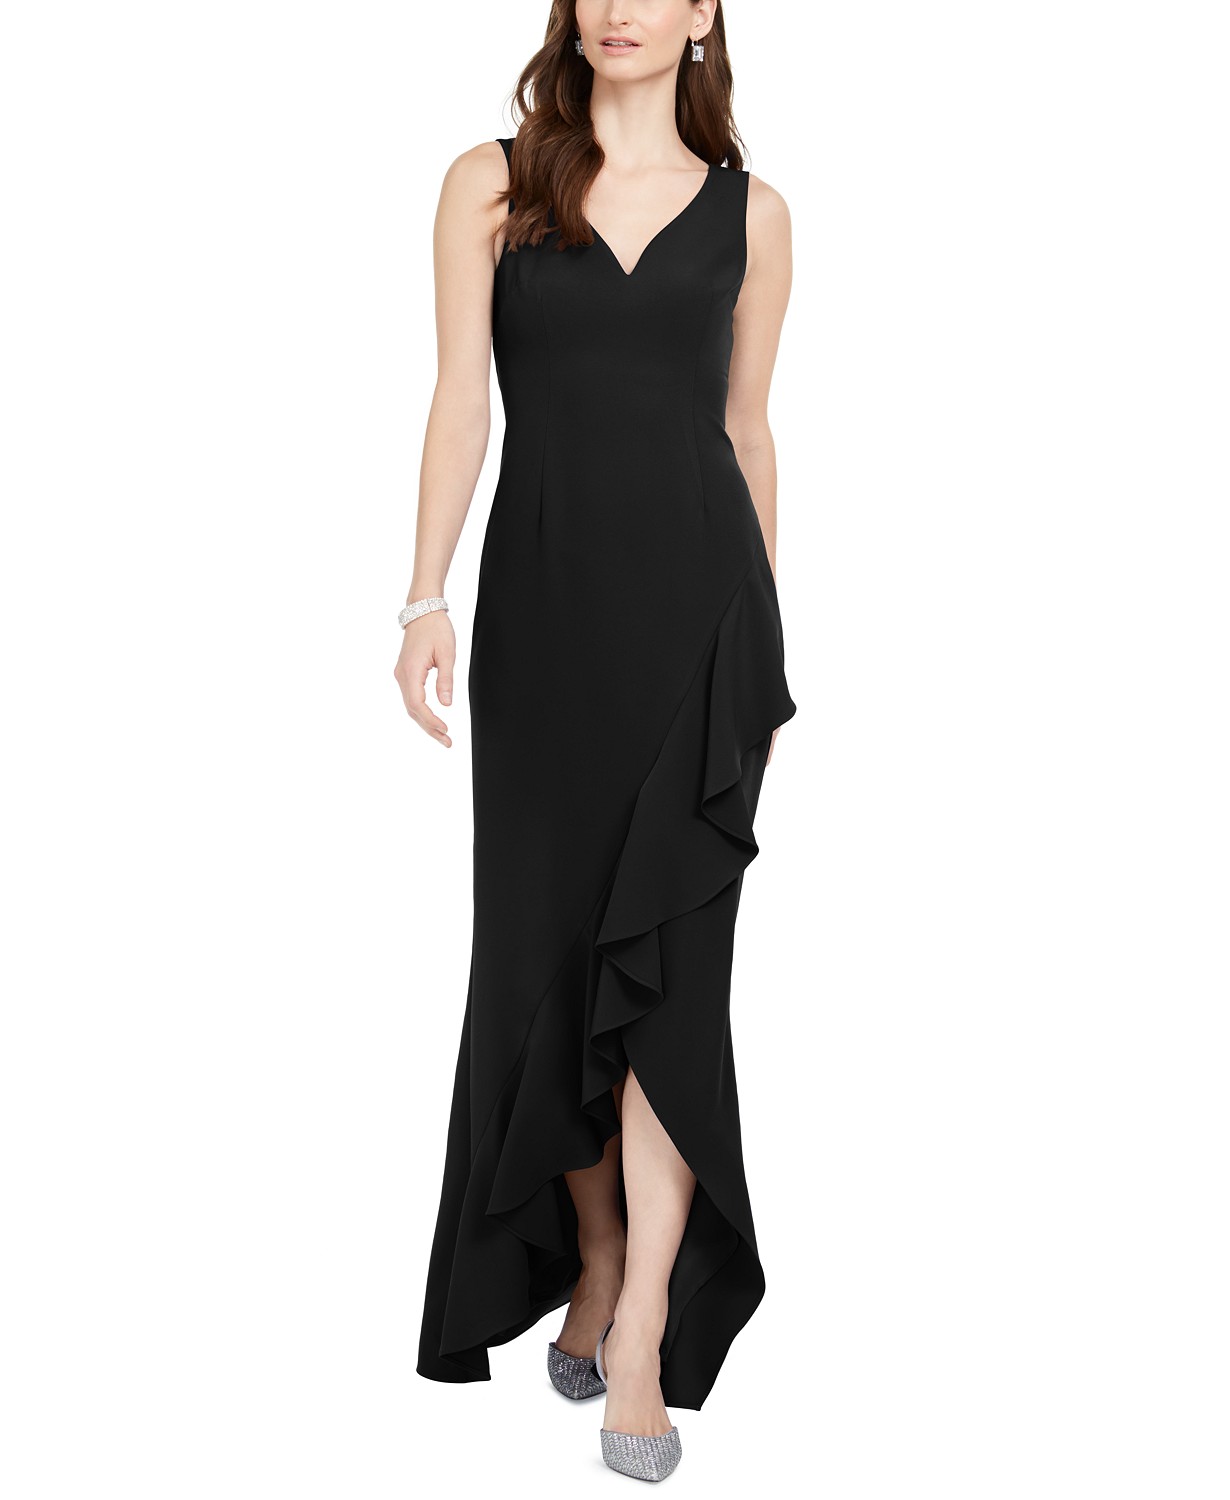 www.couturepoint.com-adrianna-papell-womens-black-floral-beaded-gown-dress-copy